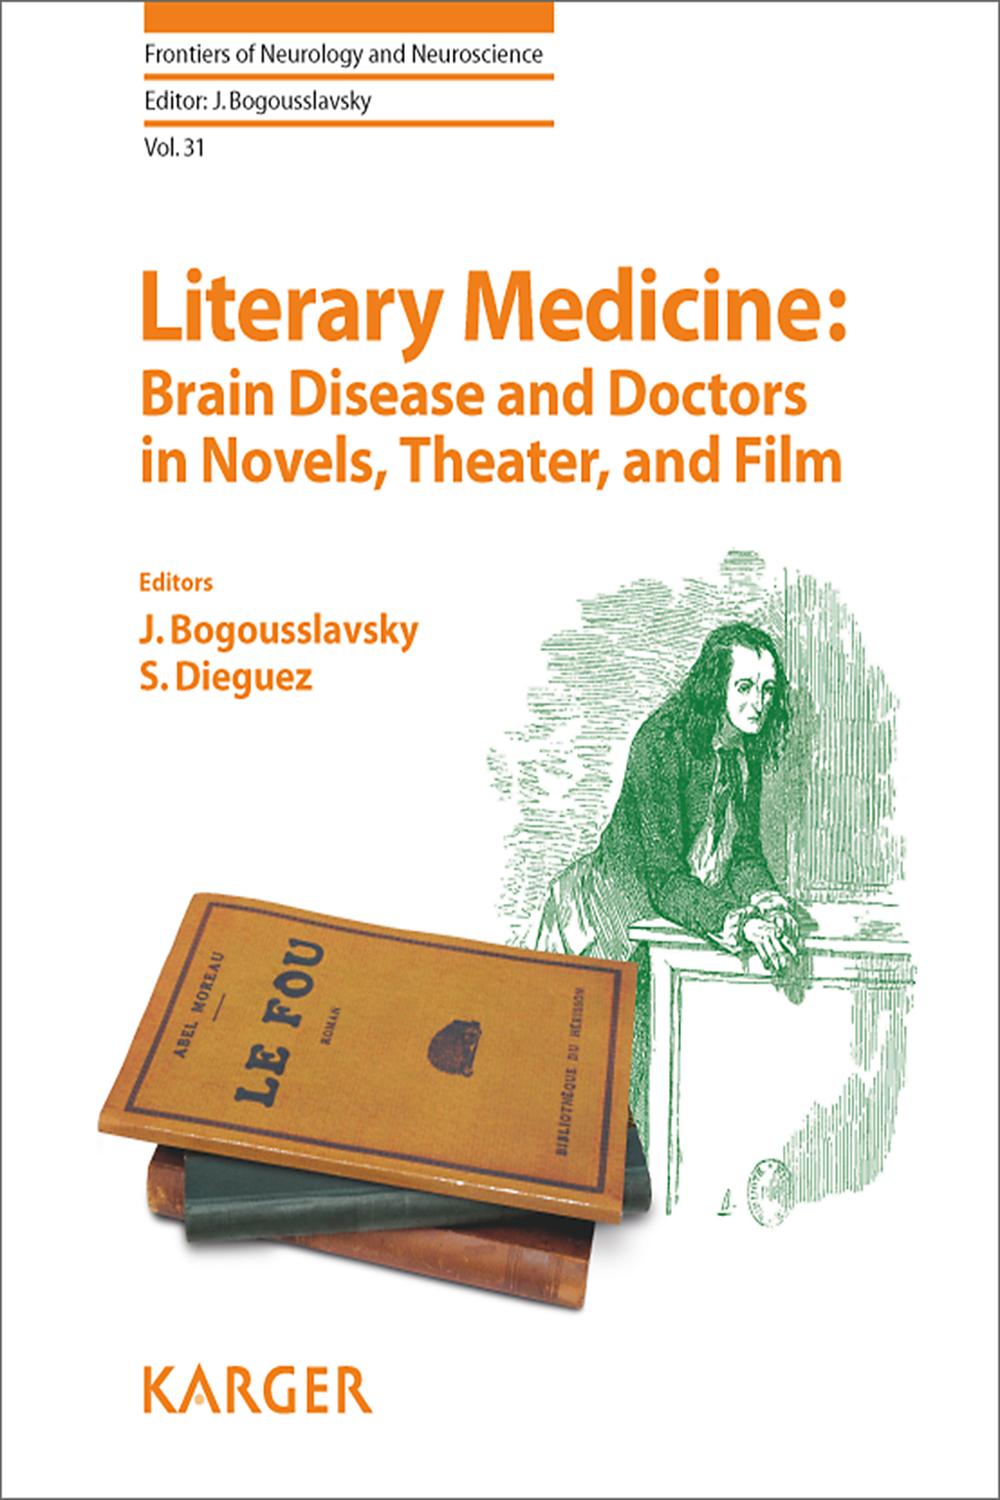 Literary Medicine: Brain Disease and Doctors in Novels, Theater, and Film - J. Bogousslavsky, S. Dieguez